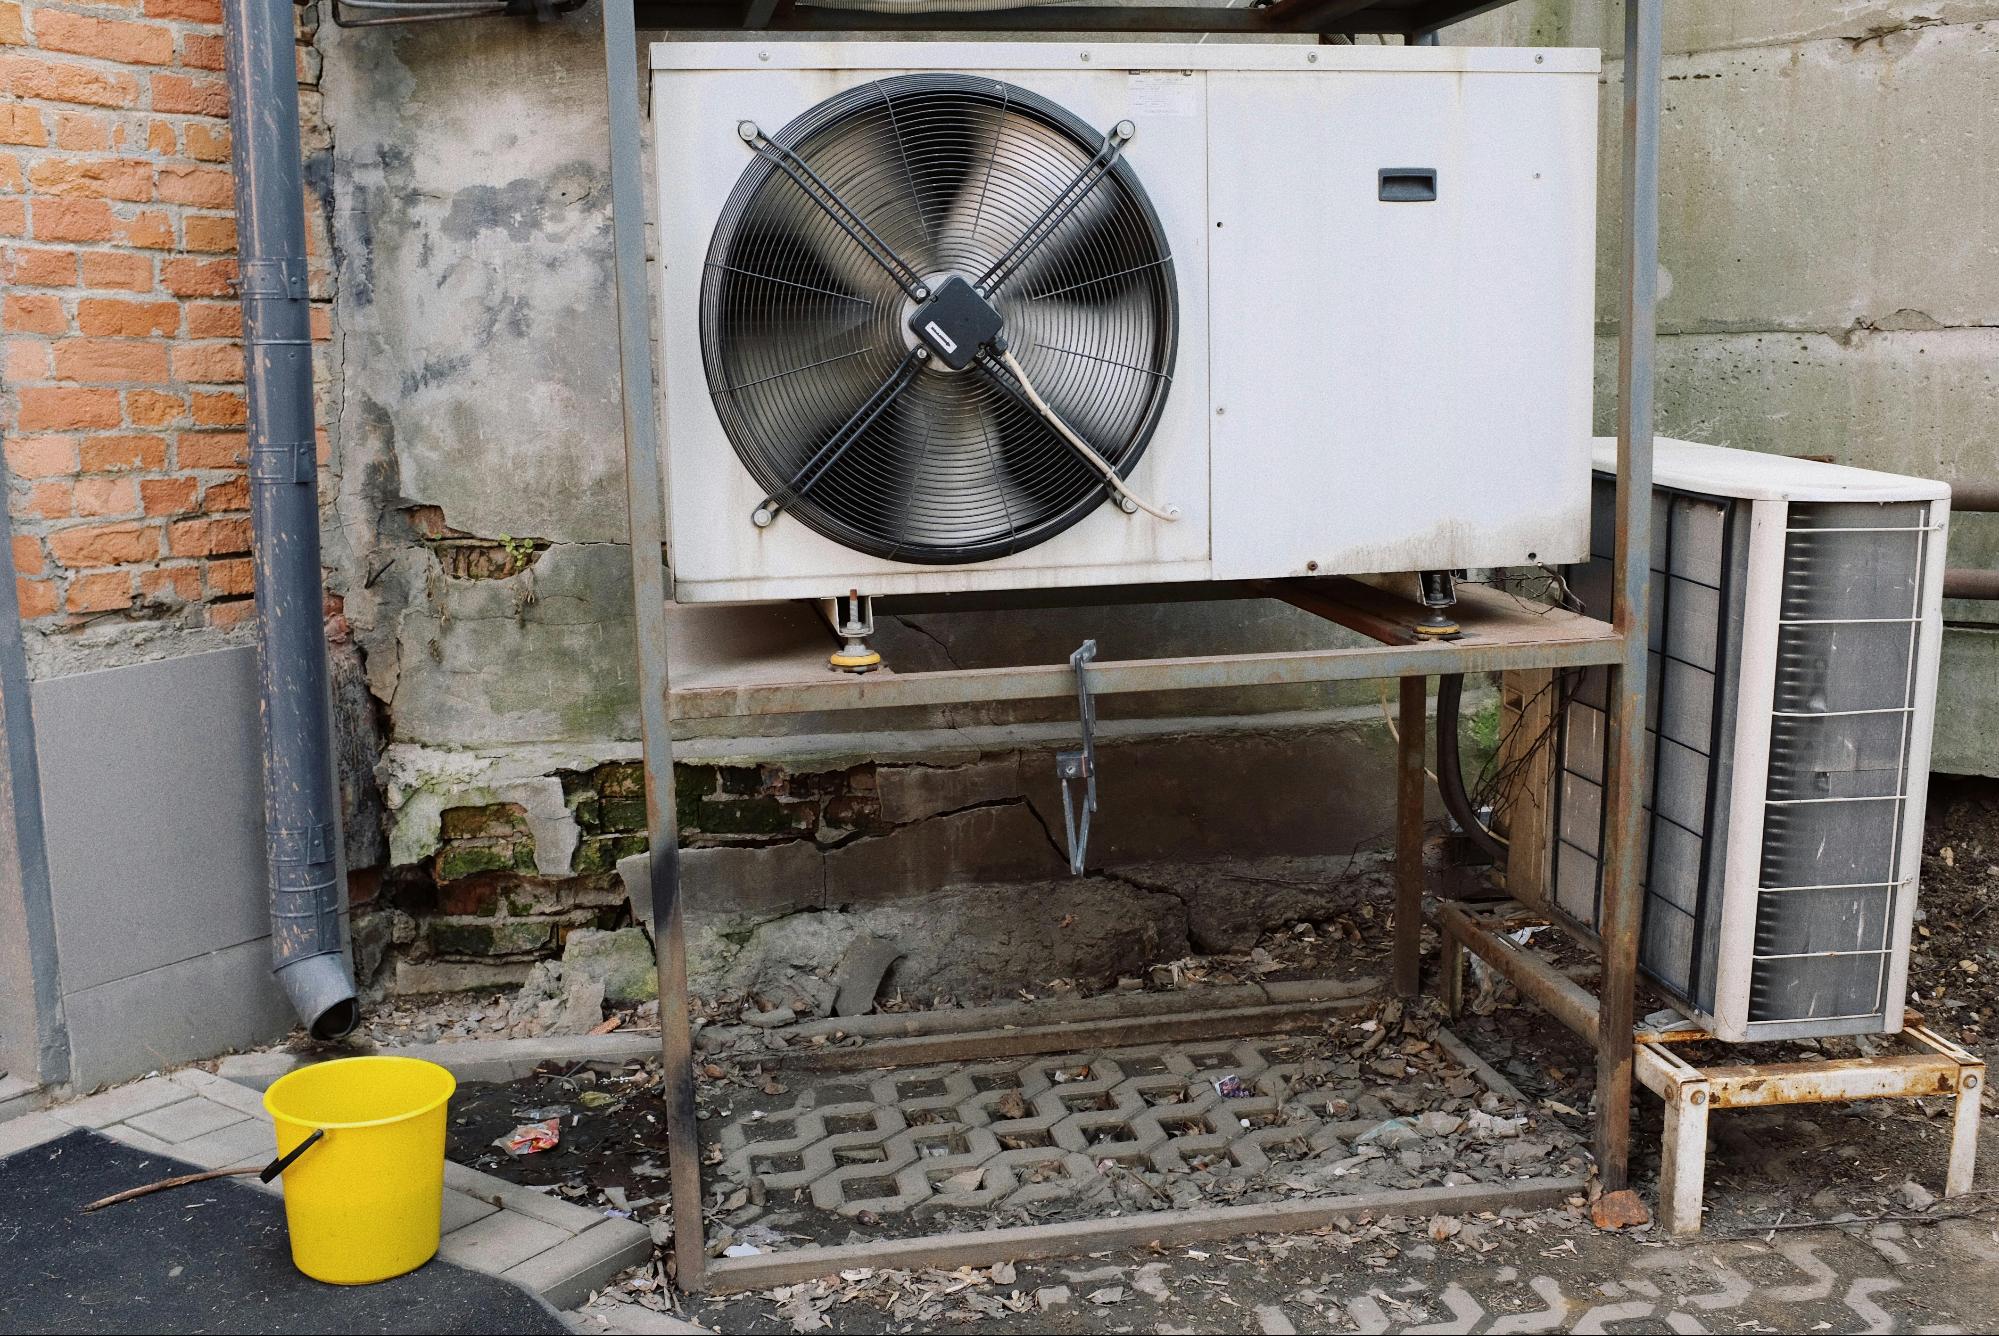 Simple Fixes for Common HVAC Issues